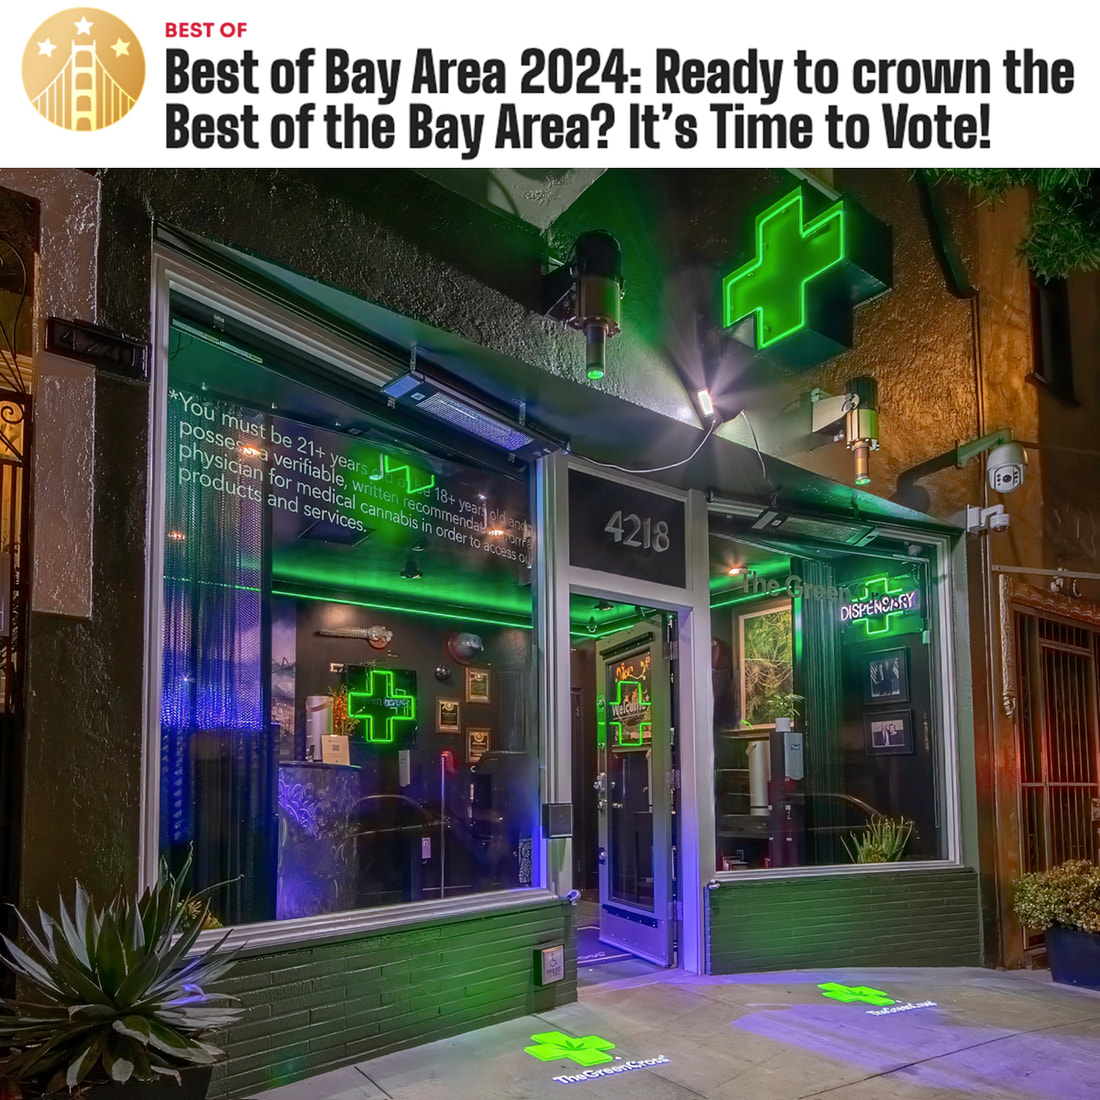 TGC Storefront: SF Gate's Best of the Bay Area